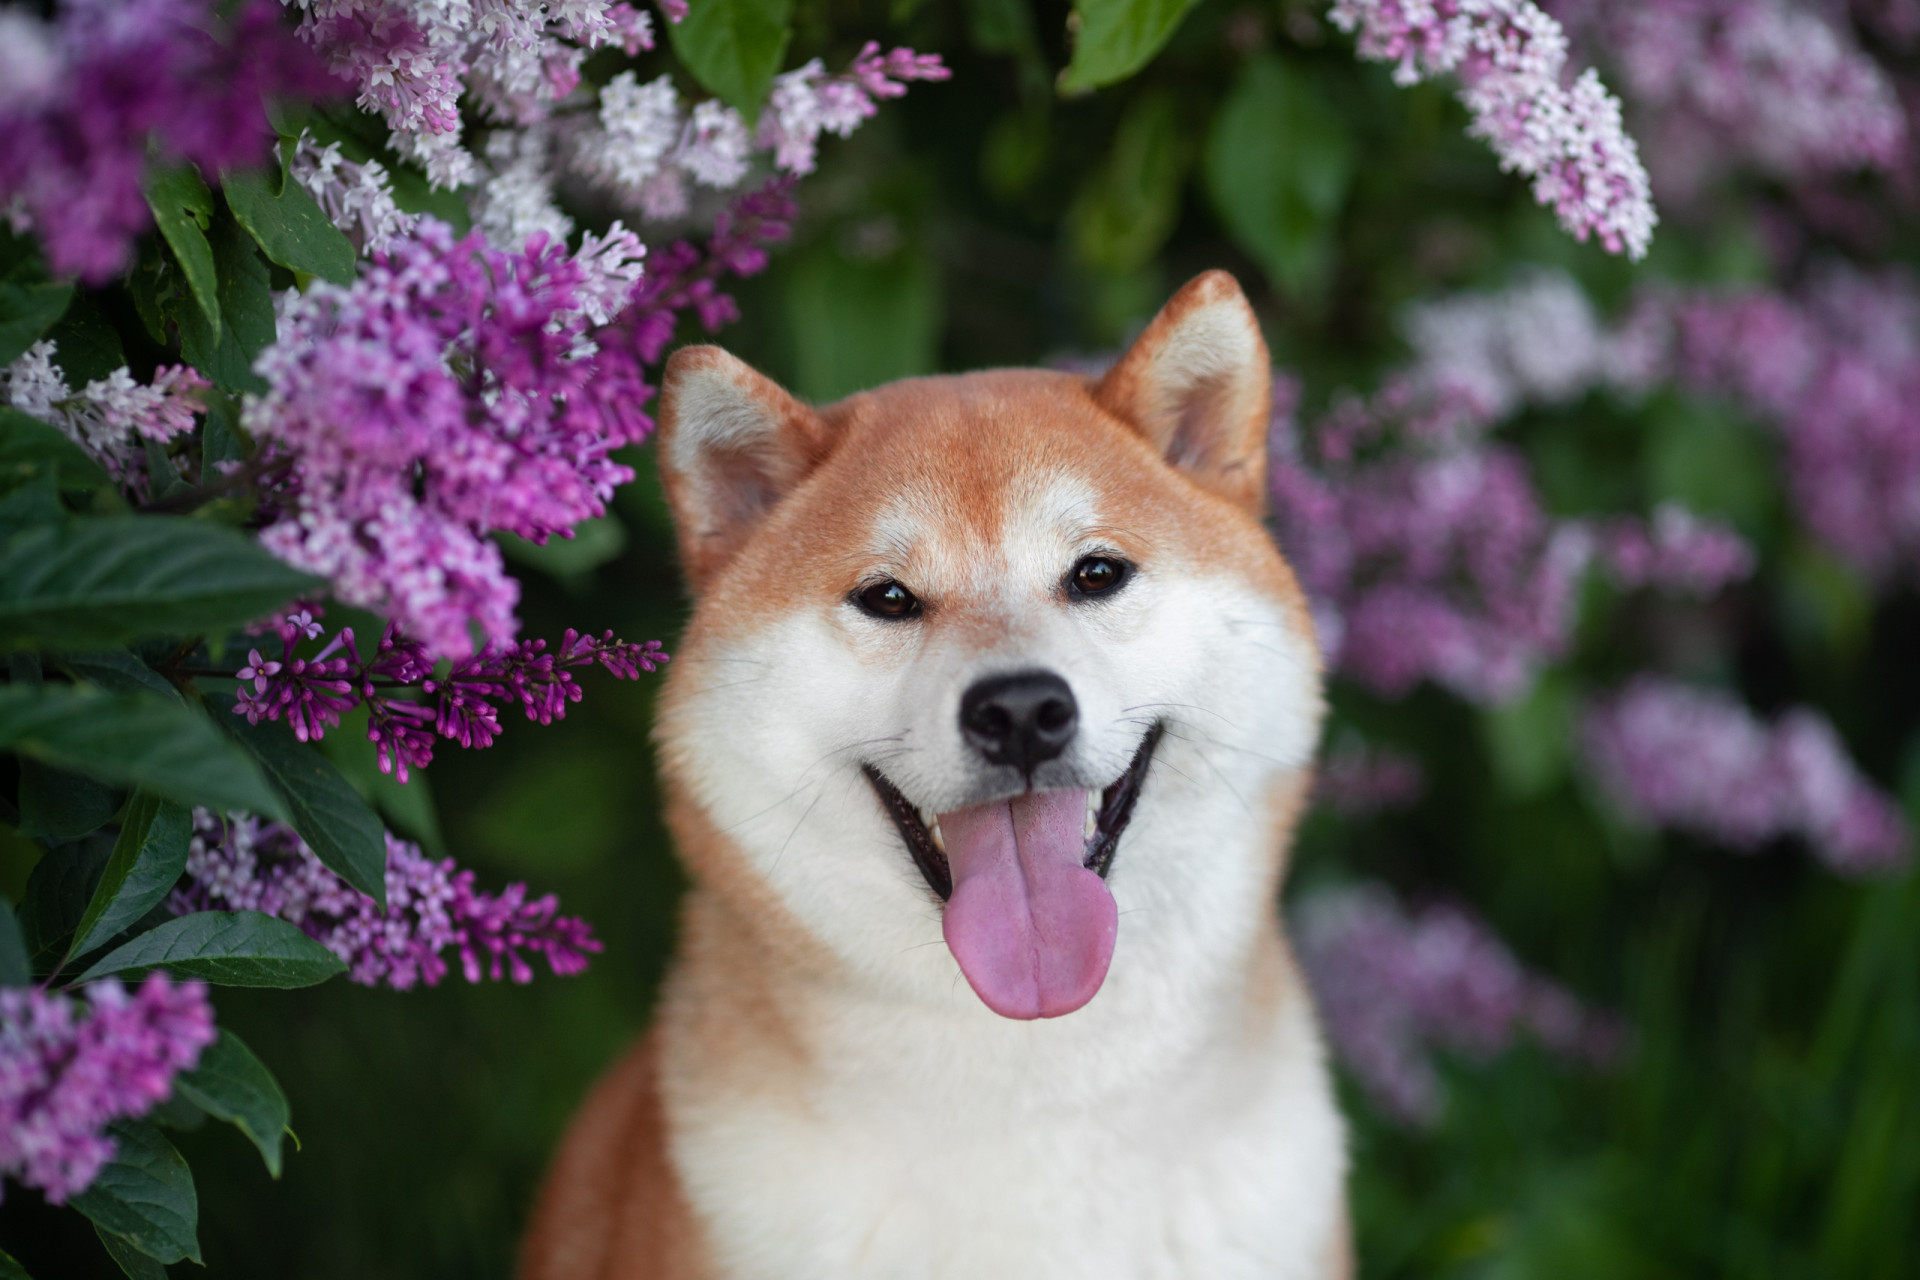 <p>This adorable mid-size dog originated in Japan. Unusual for larger breeds, the Shiba Inu is expected to live about 16 years.</p><p><a href="https://www.msn.com/en-us/community/channel/vid-7xx8mnucu55yw63we9va2gwr7uihbxwc68fxqp25x6tg4ftibpra?cvid=94631541bc0f4f89bfd59158d696ad7e">Follow us and access great exclusive content every day</a></p>